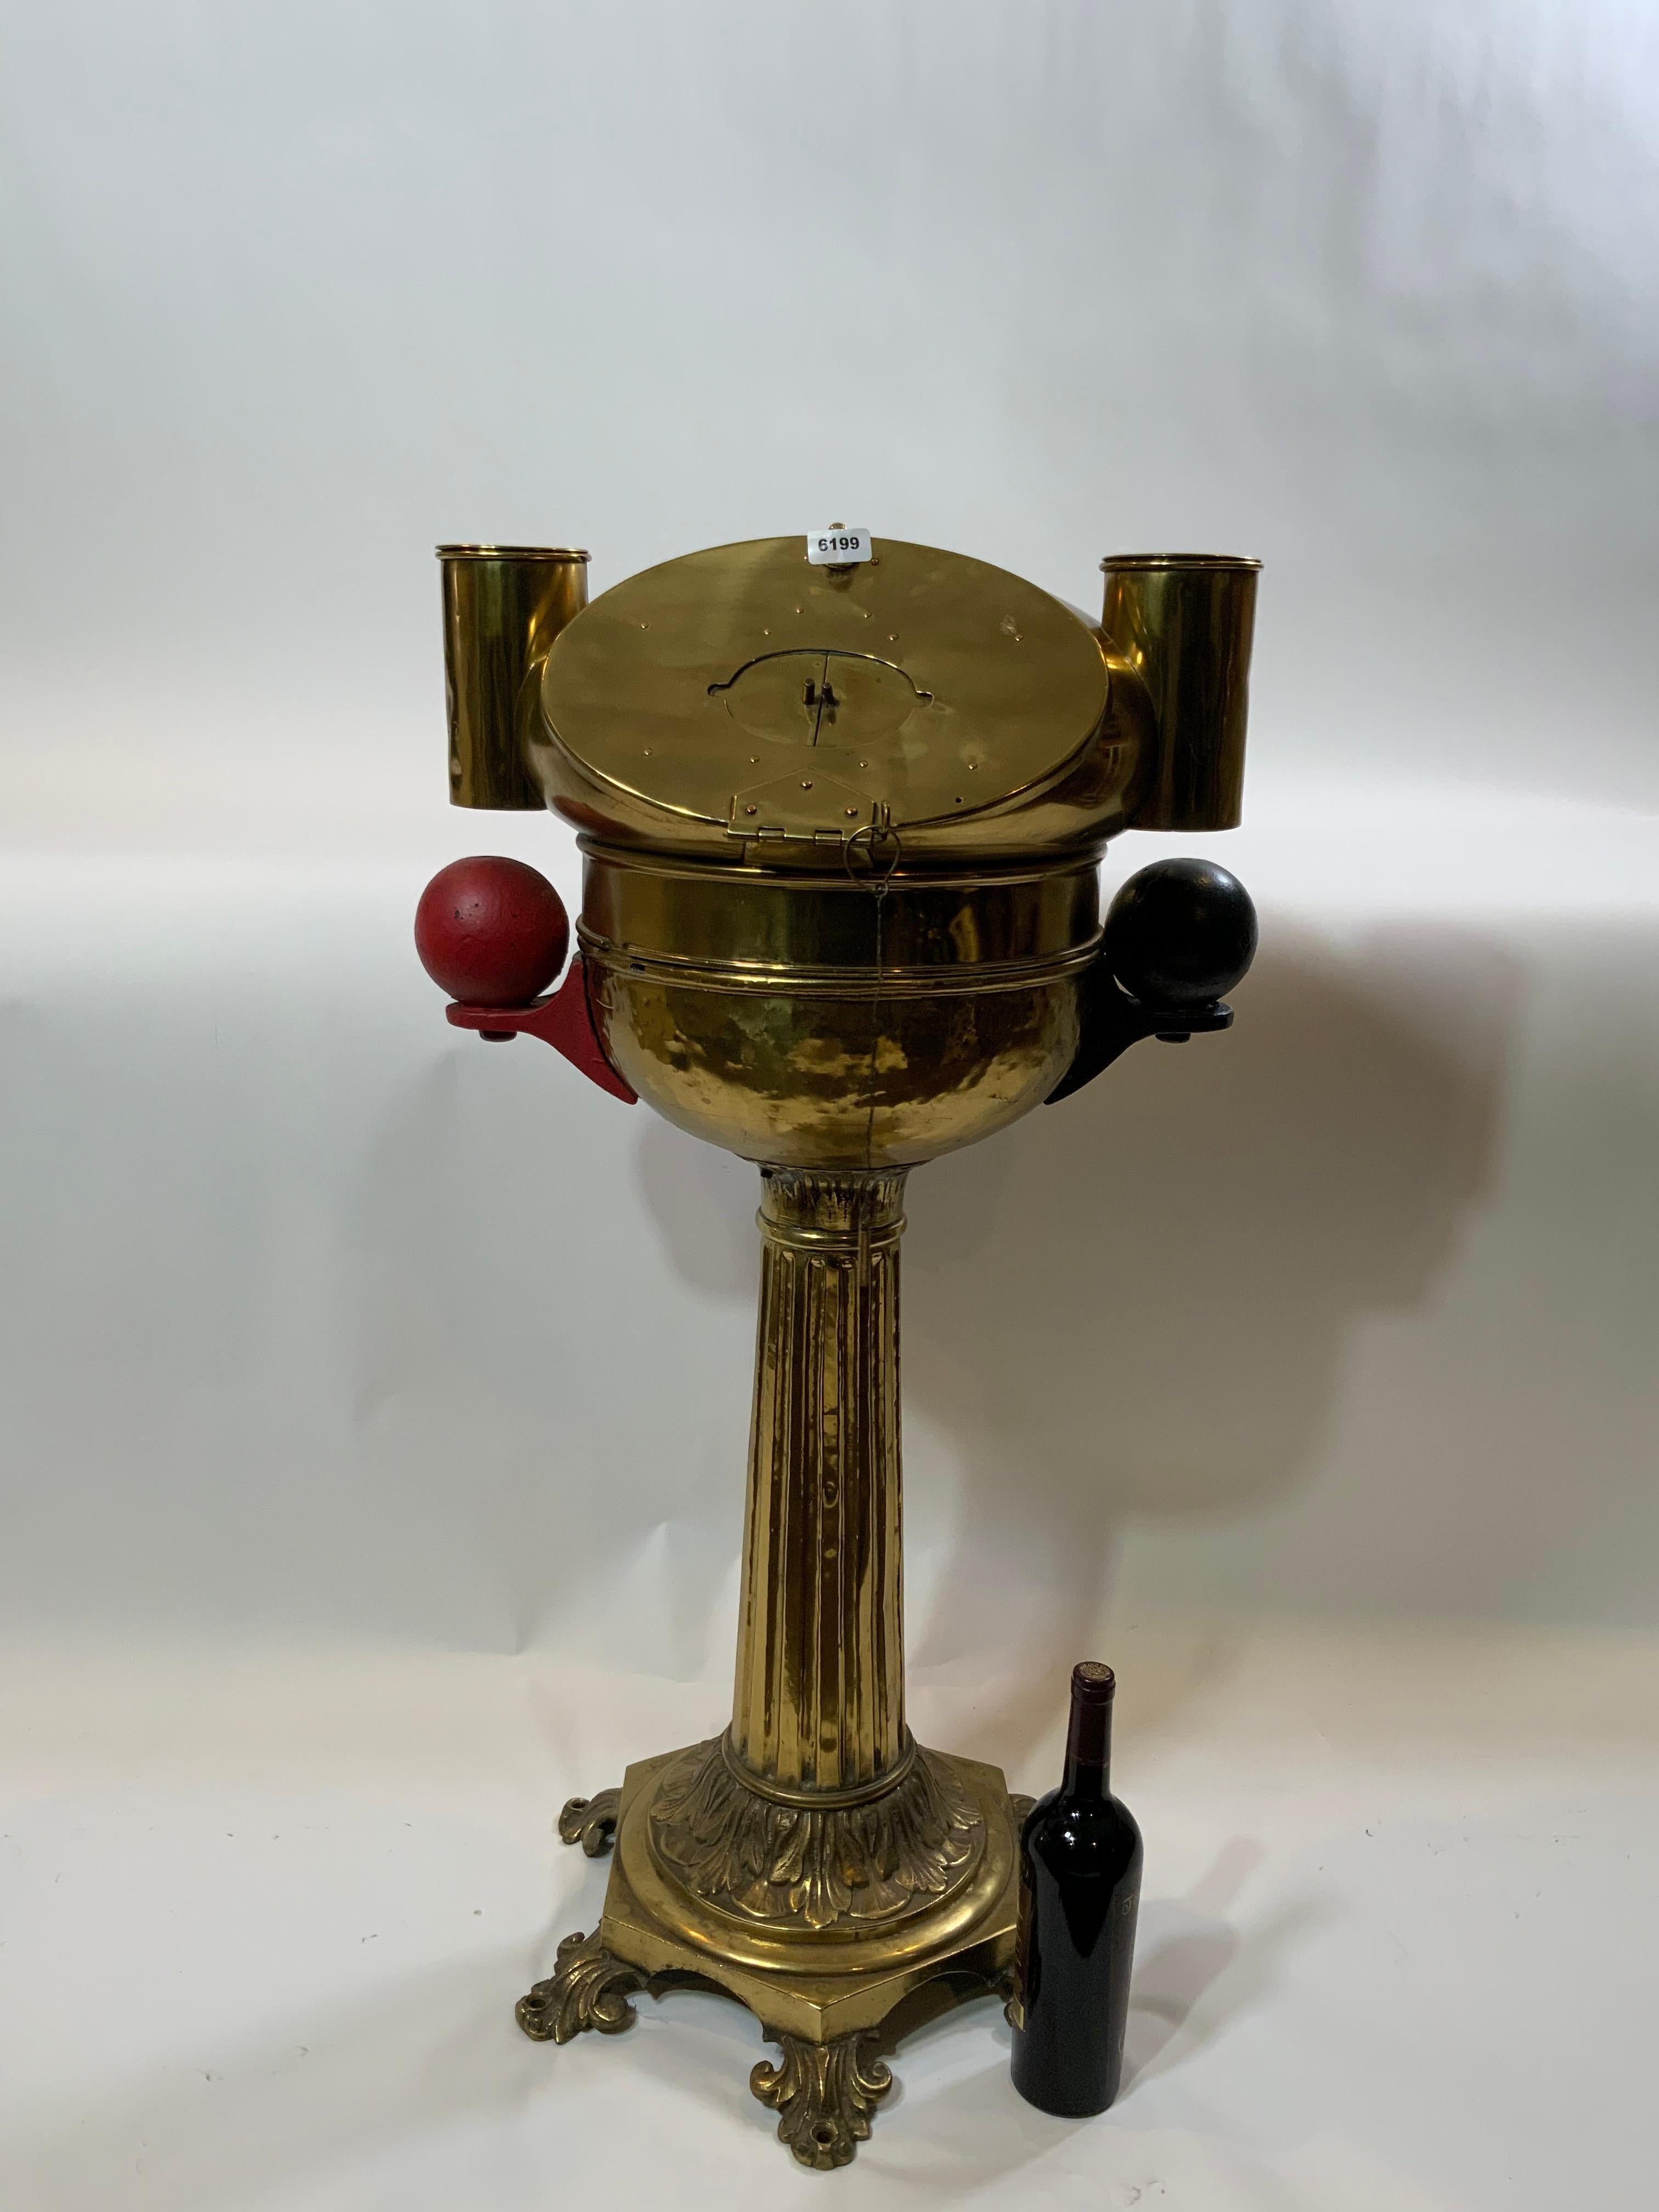 Rare nineteenth century solid brass yacht binnacle with gimballed compass marked with the maker's name Whyte Thomson Companies of 96 Hope St, Glasgow. Compass is polished and lacquered. The ornate base with six feet are pierced with mounting holes.